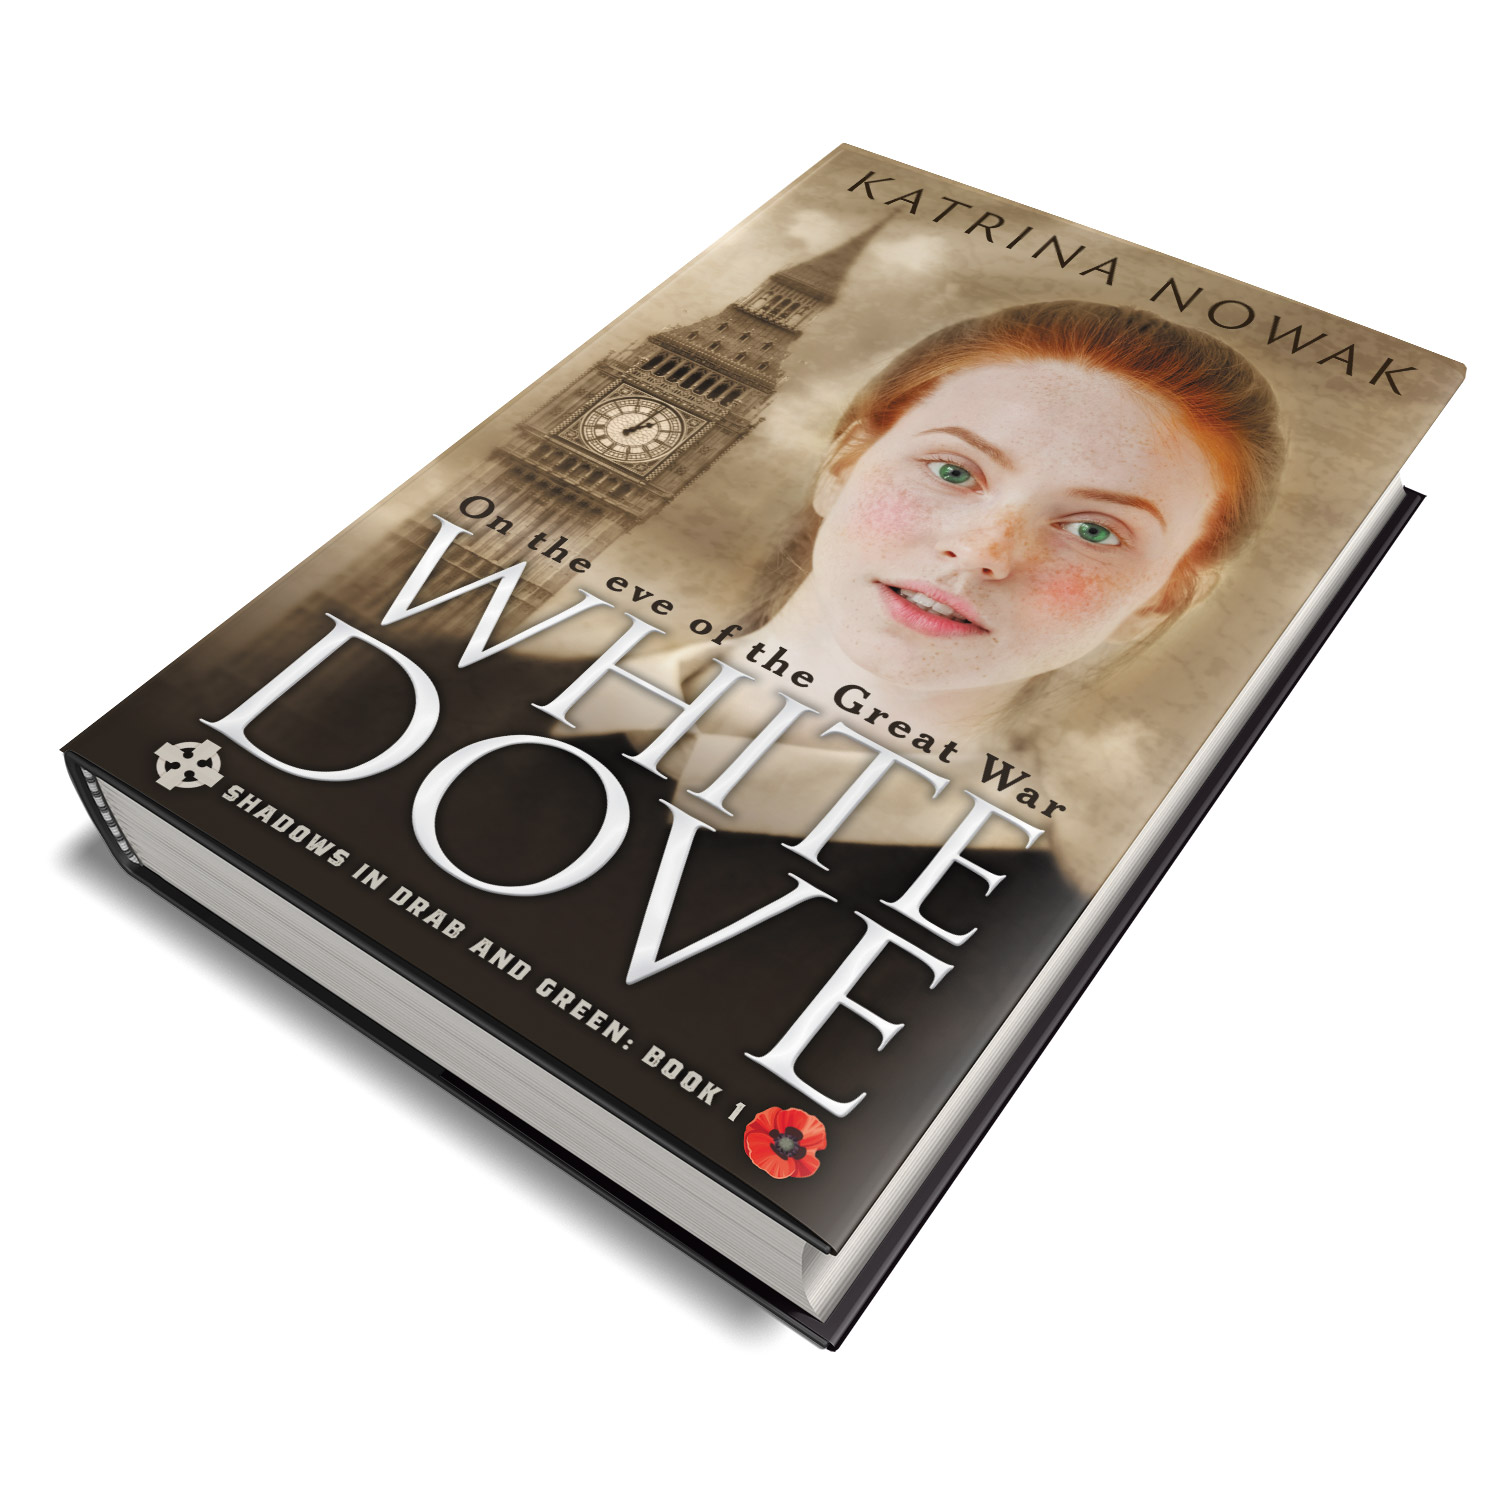 'White Dove' is a sweeping historical novel, set on the eve of WW1, by Katrina Nowak. The book cover and interior were designed by Mark Thomas, of coverness.com. To find out more about my book design services, please visit www.coverness.com.